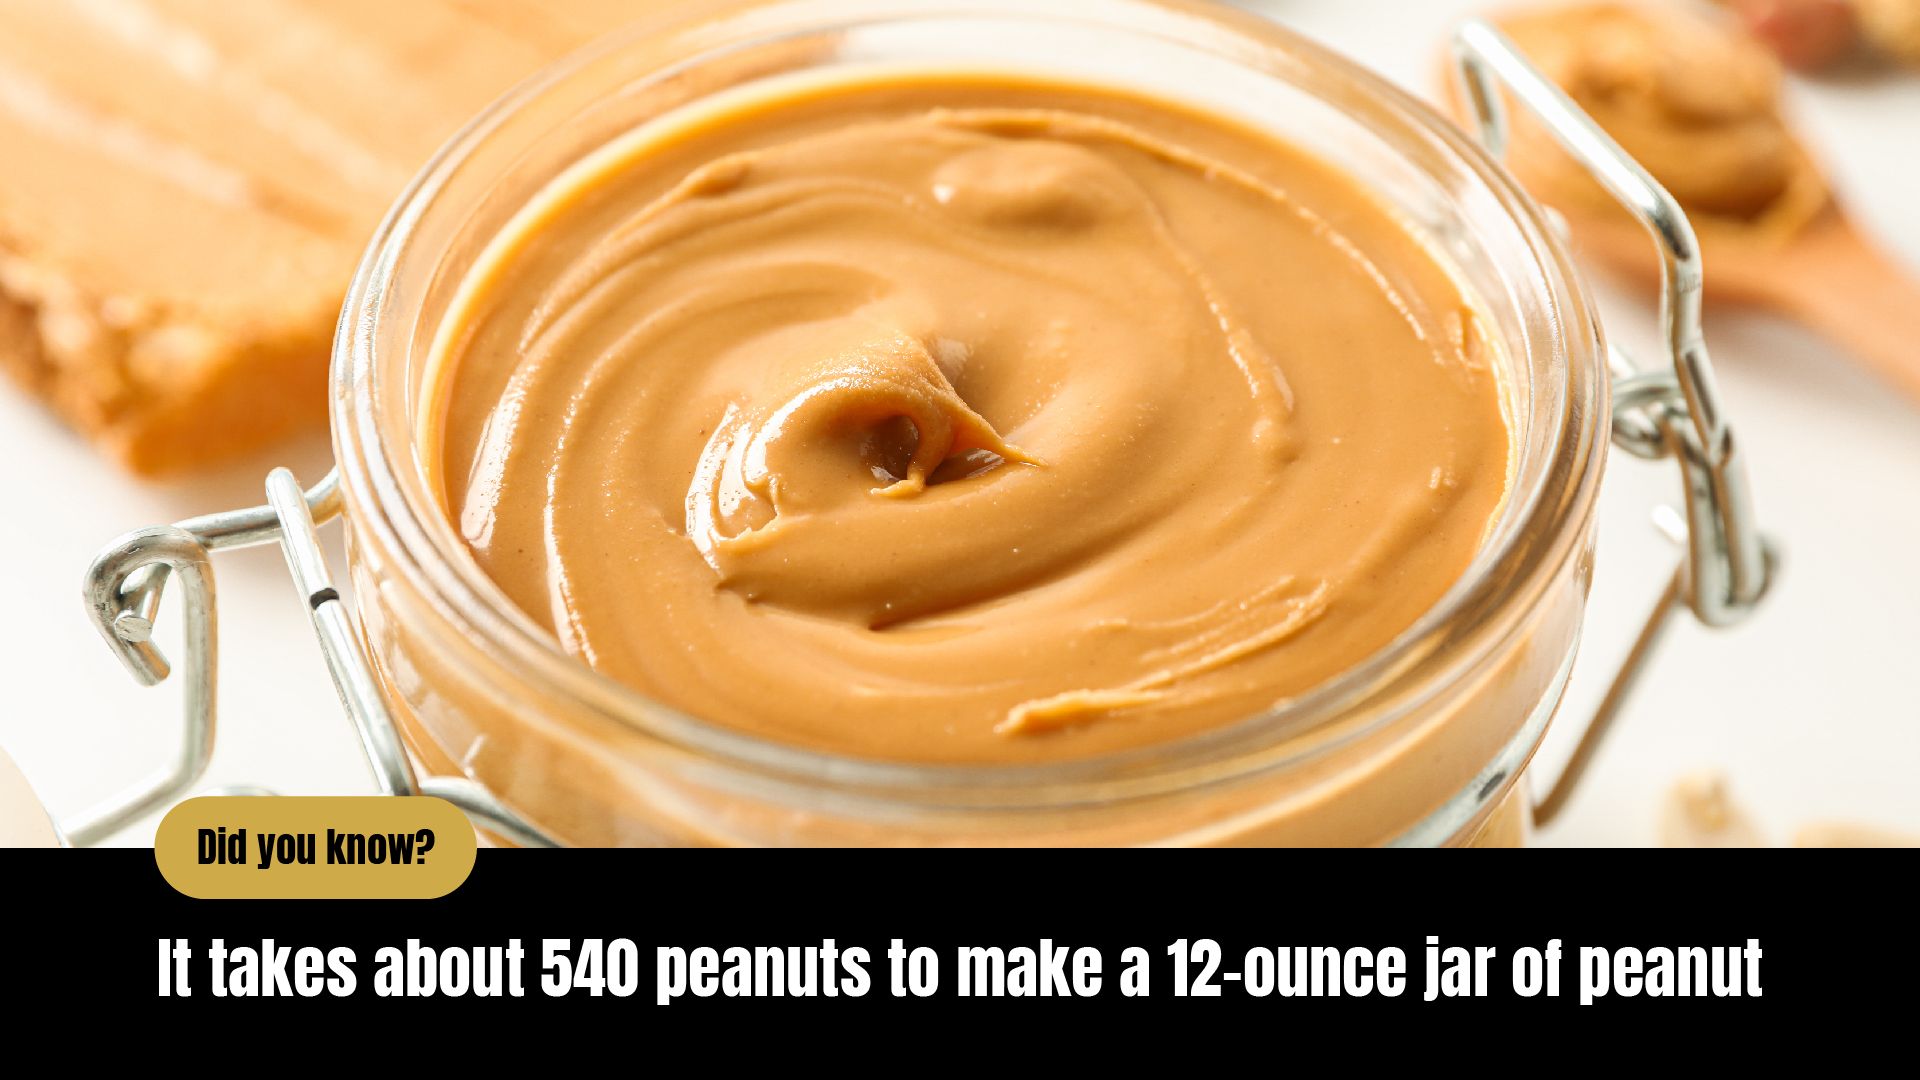 Peanut Butter Benefits did you know